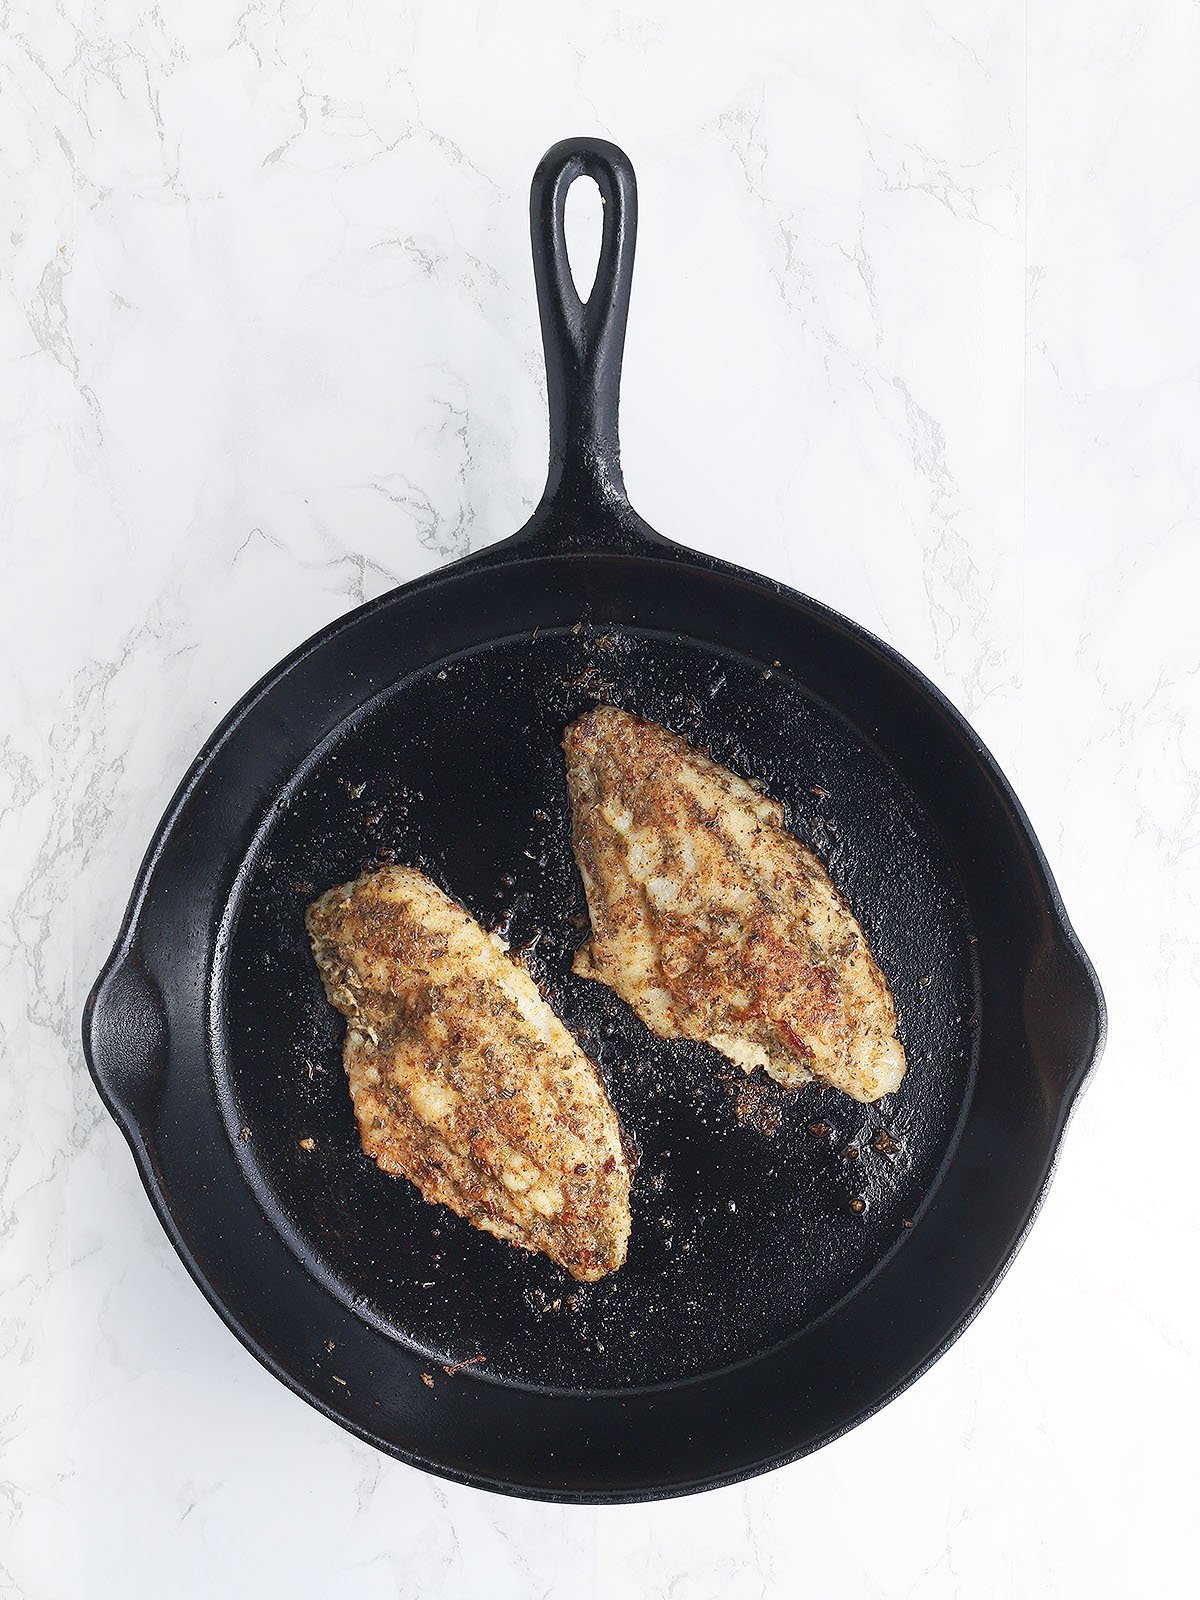 Two catfish fillets in a cast iron skillet after they have been seared on both sides.